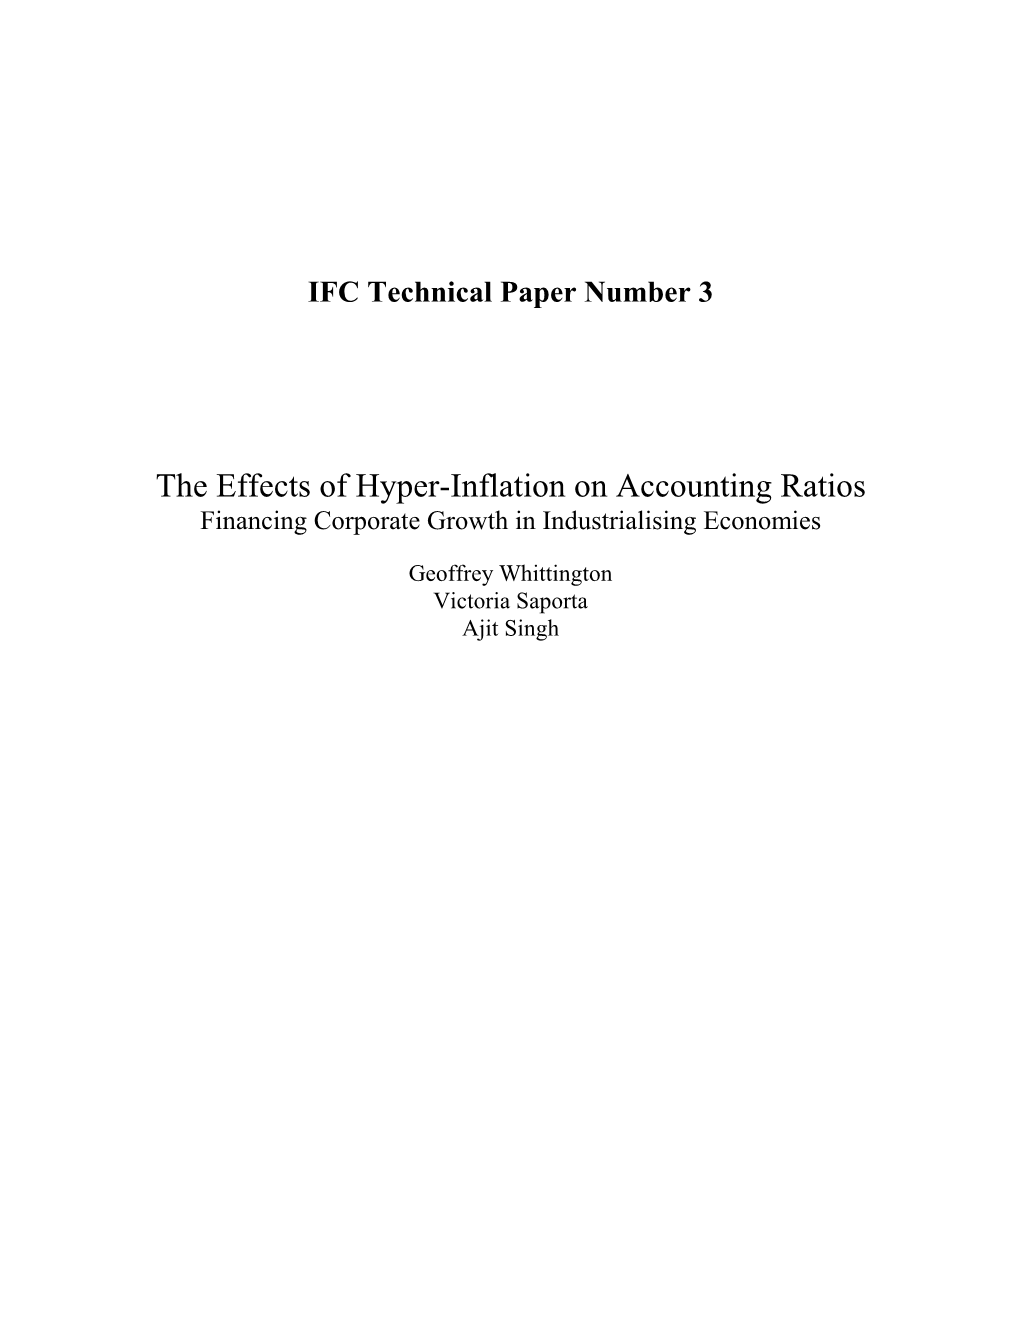 The Effects of Hyper-Inflation on Accounting Ratios Financing Corporate Growth in Industrialising Economies